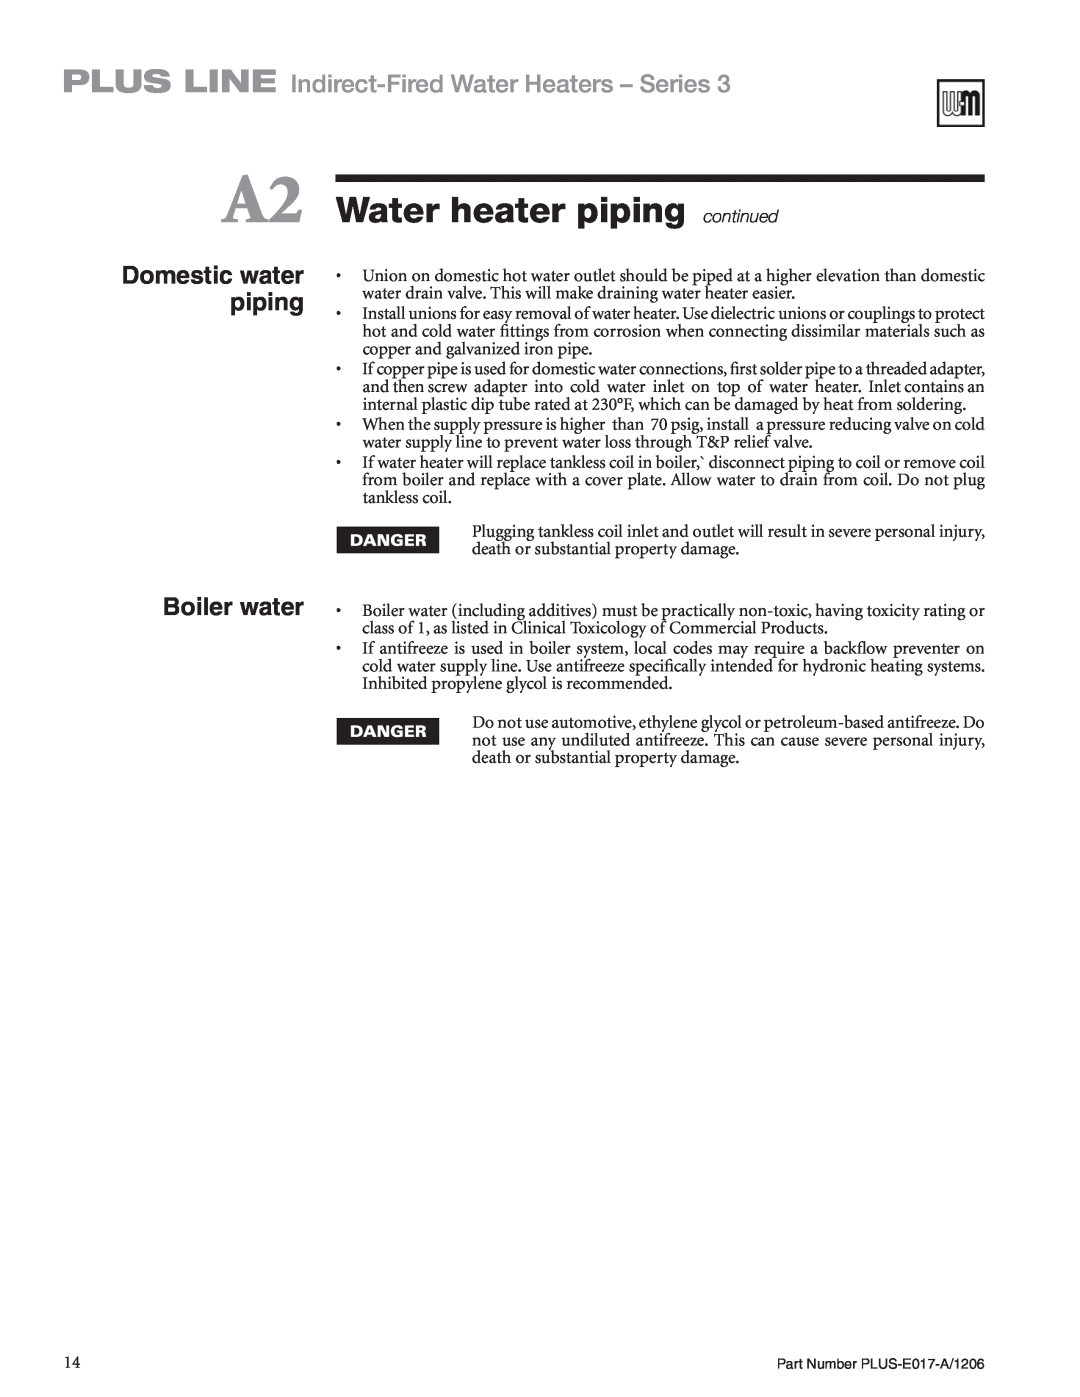 Weil-McLain PLUS-E017-A/1206 manual Boiler water, Domestic water piping, A2 Water heater pipingcontinued 